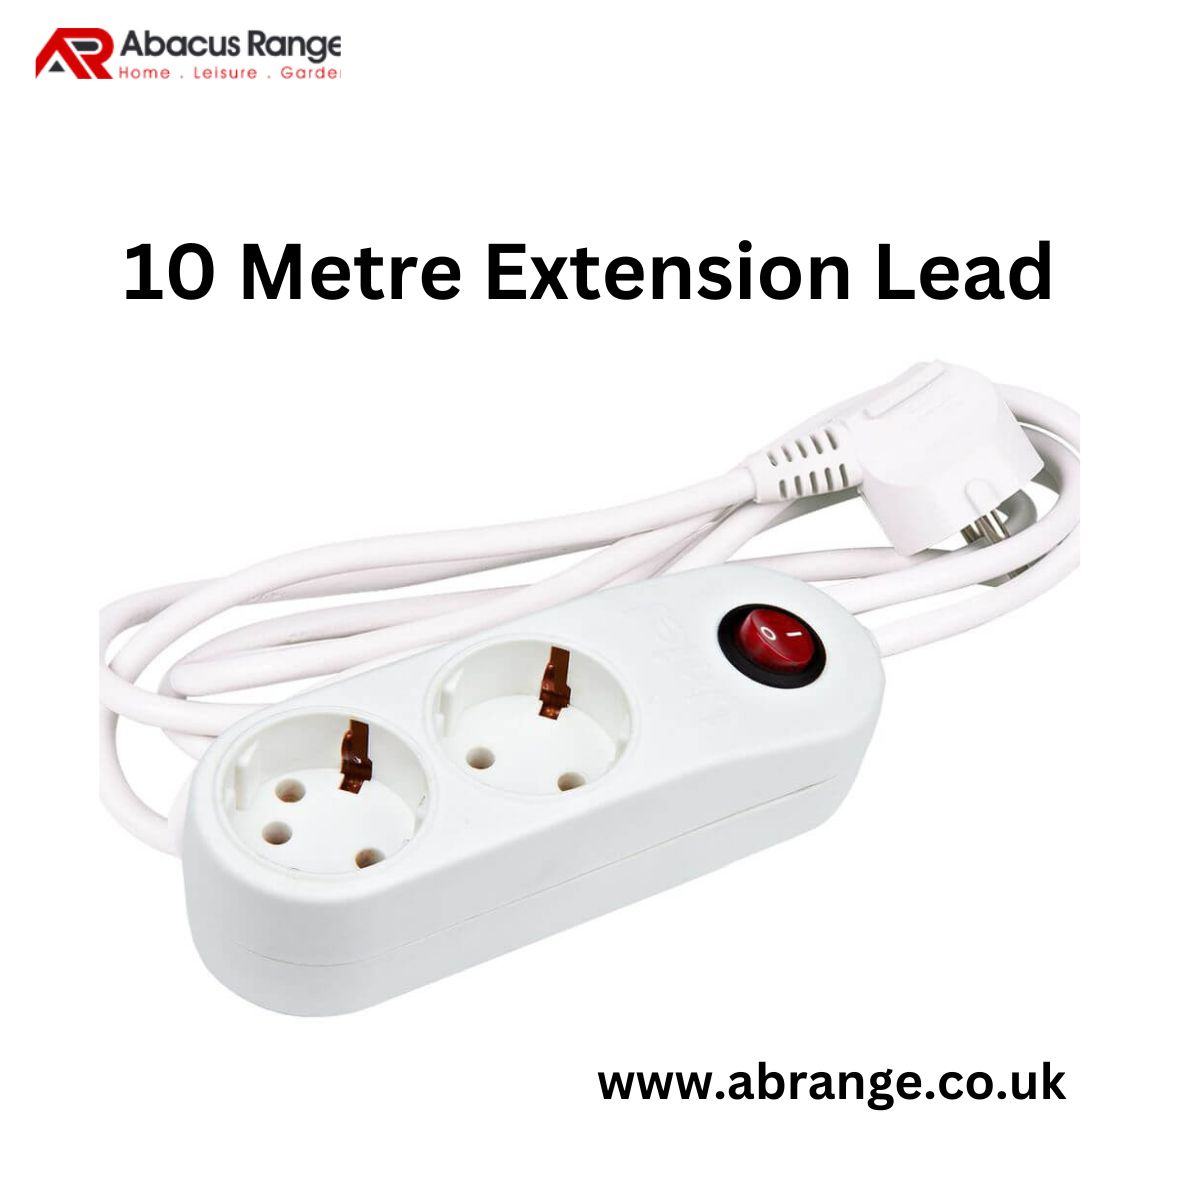 10 Metre Extension Lead: Unveiling the Power of Connectivity